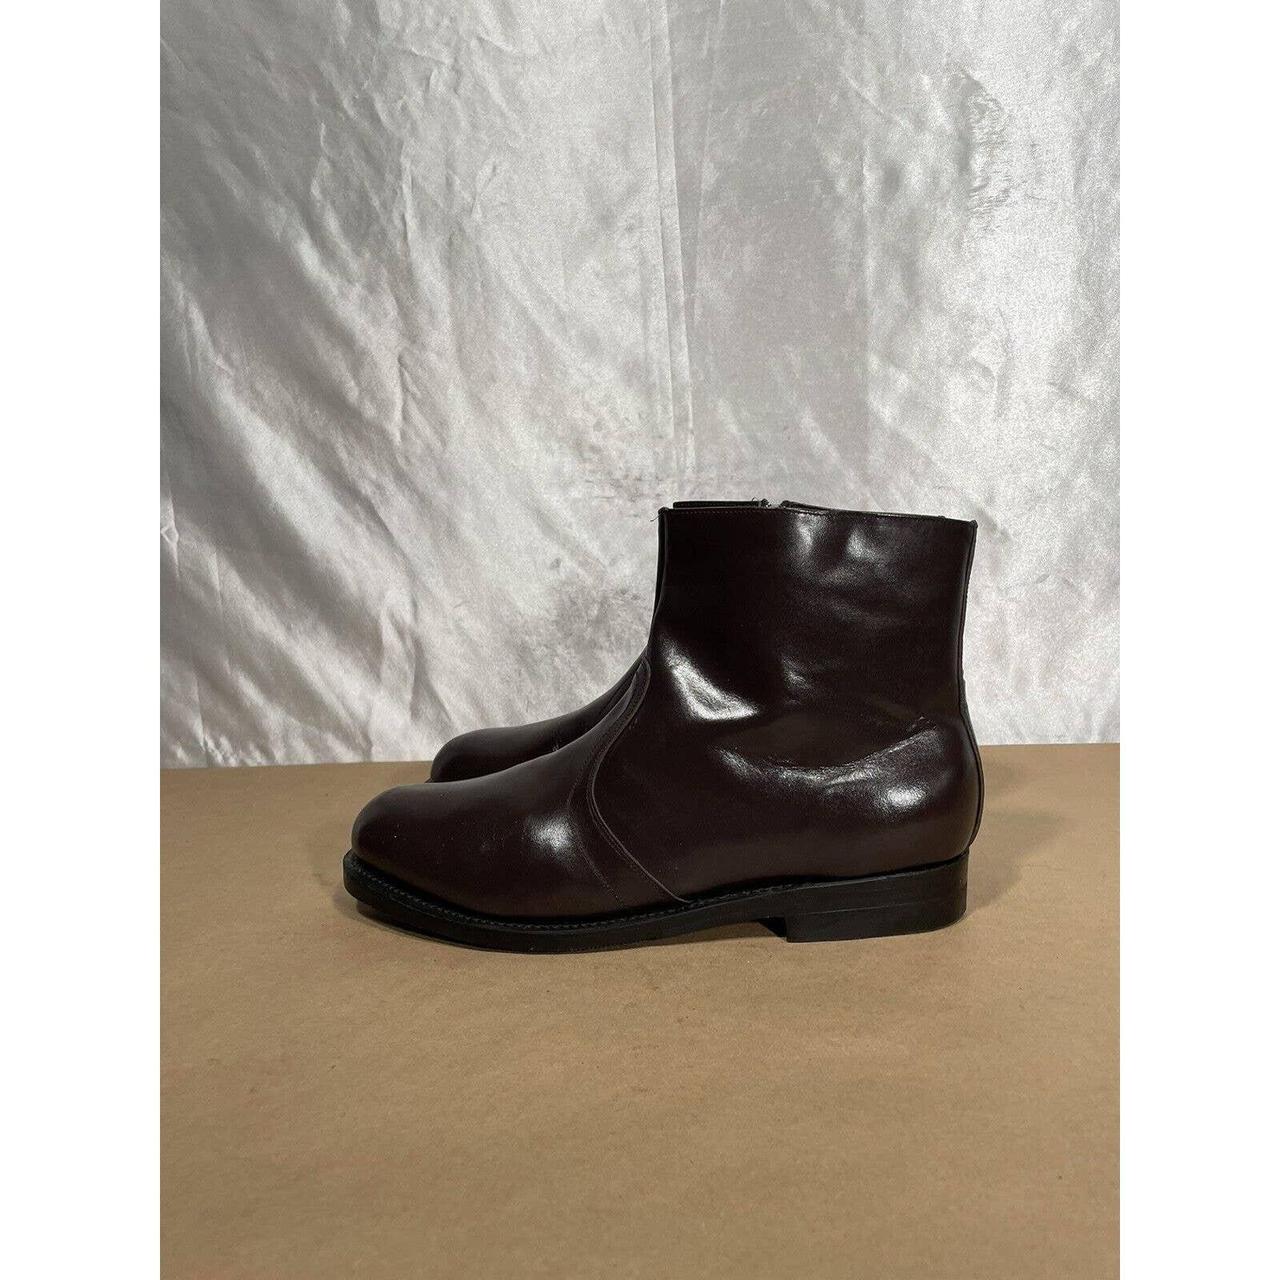 Haband Brown Leather Frisco Style Dress Boots Men’s... - Depop